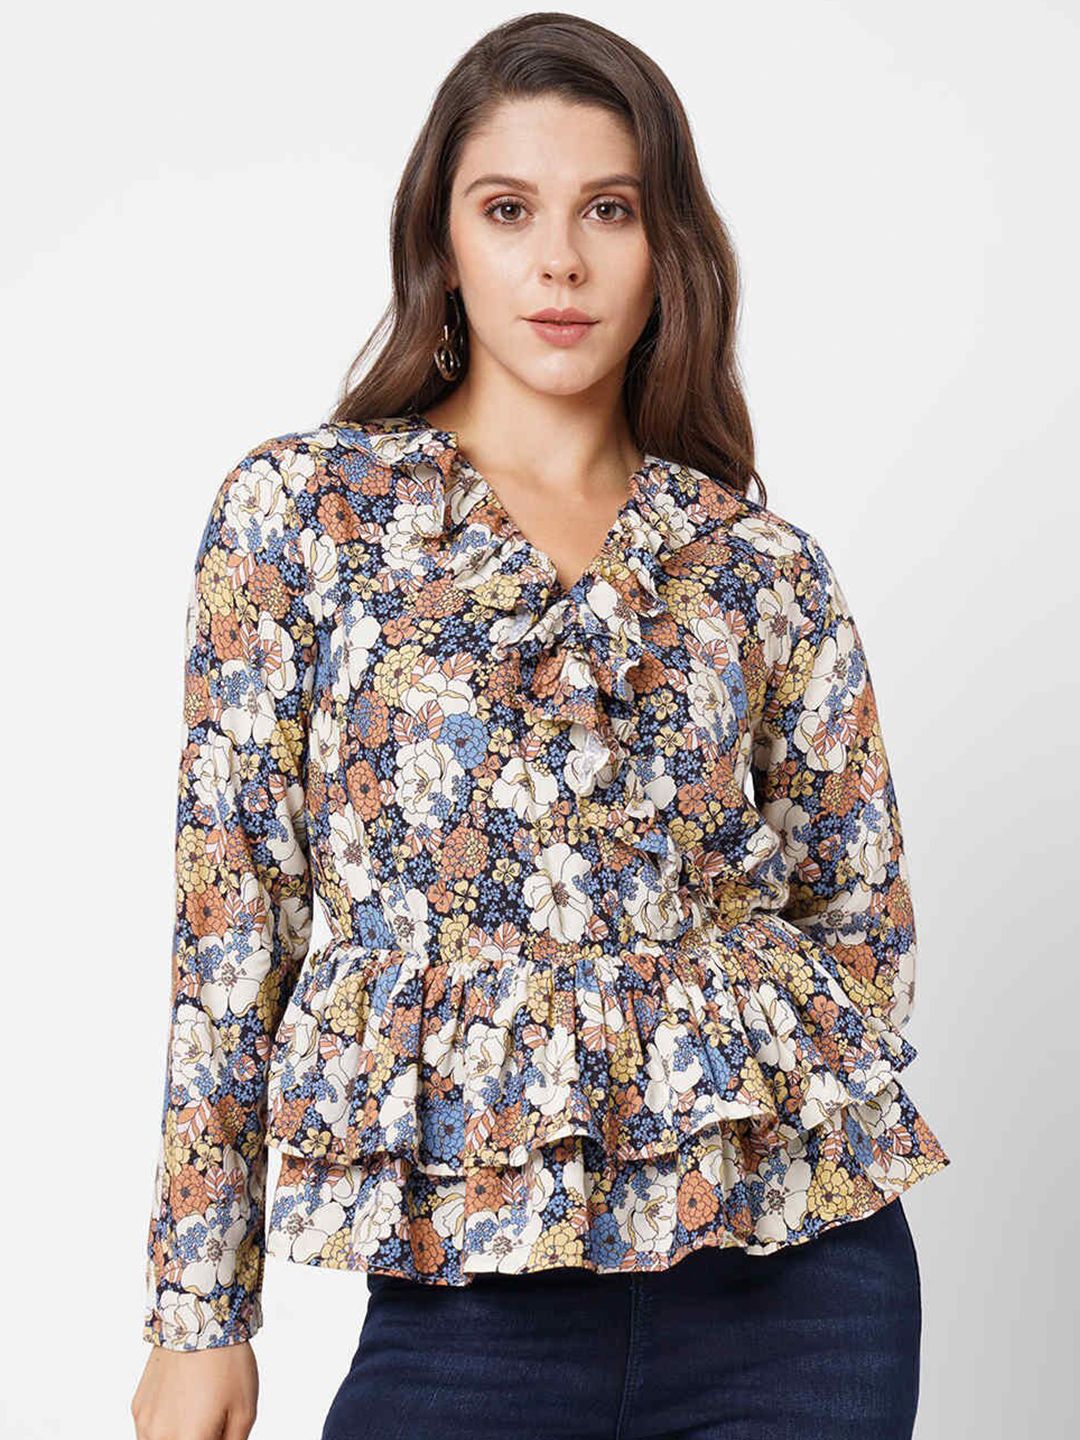 Pepe Jeans Brown & White Floral Print Peplum Top Price in India